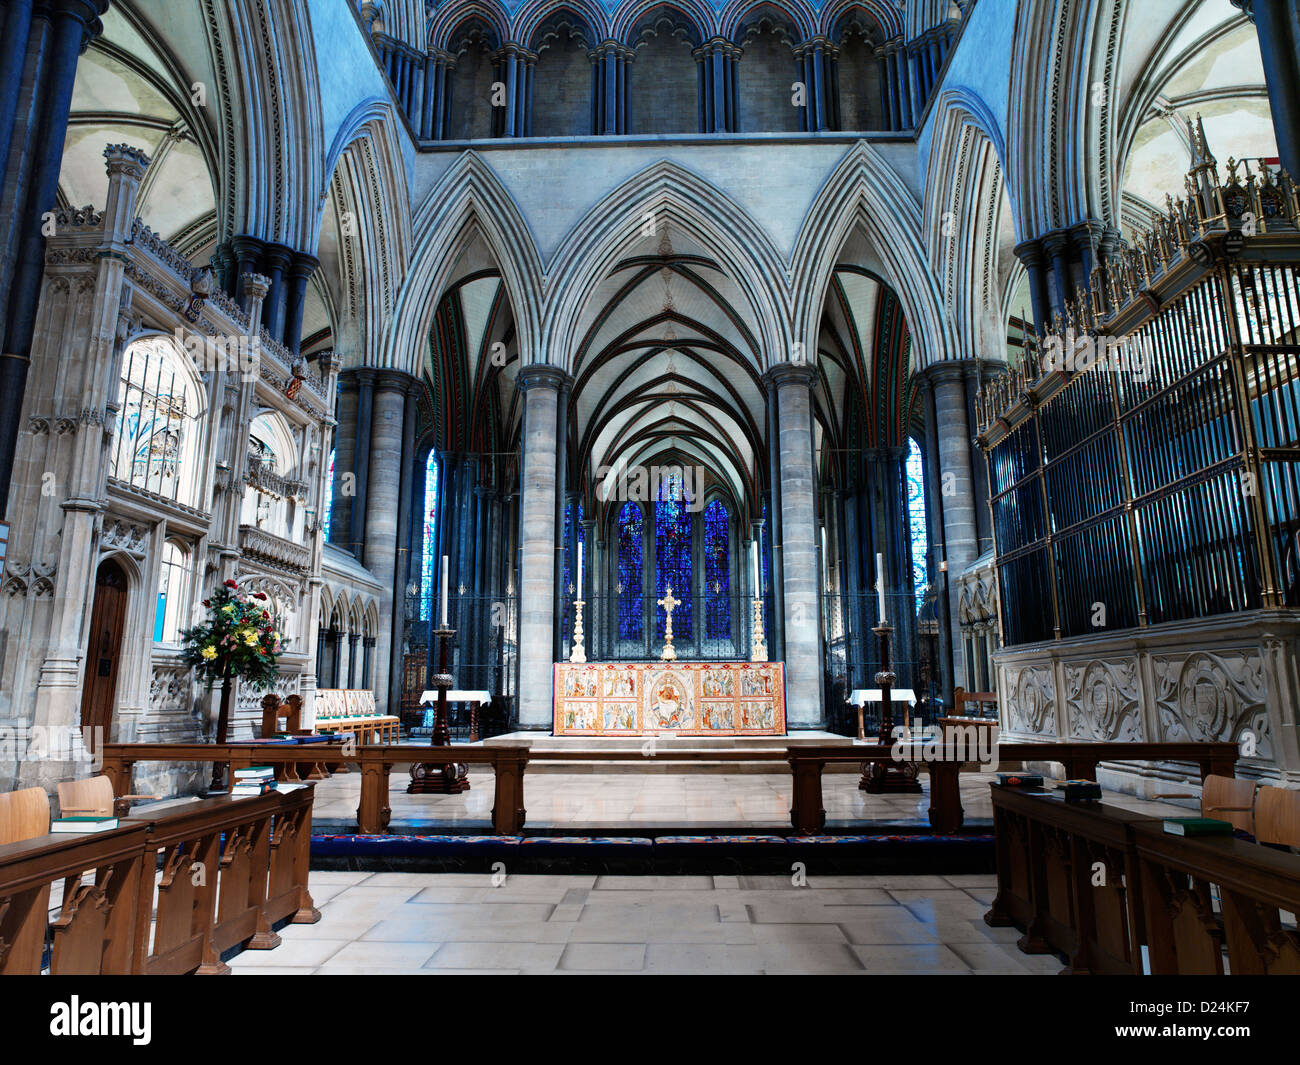 Salisbury Wiltshire England Salisbury Cathedral High Altar and Prisoner of Conscience Stained Glass Window Stock Photo